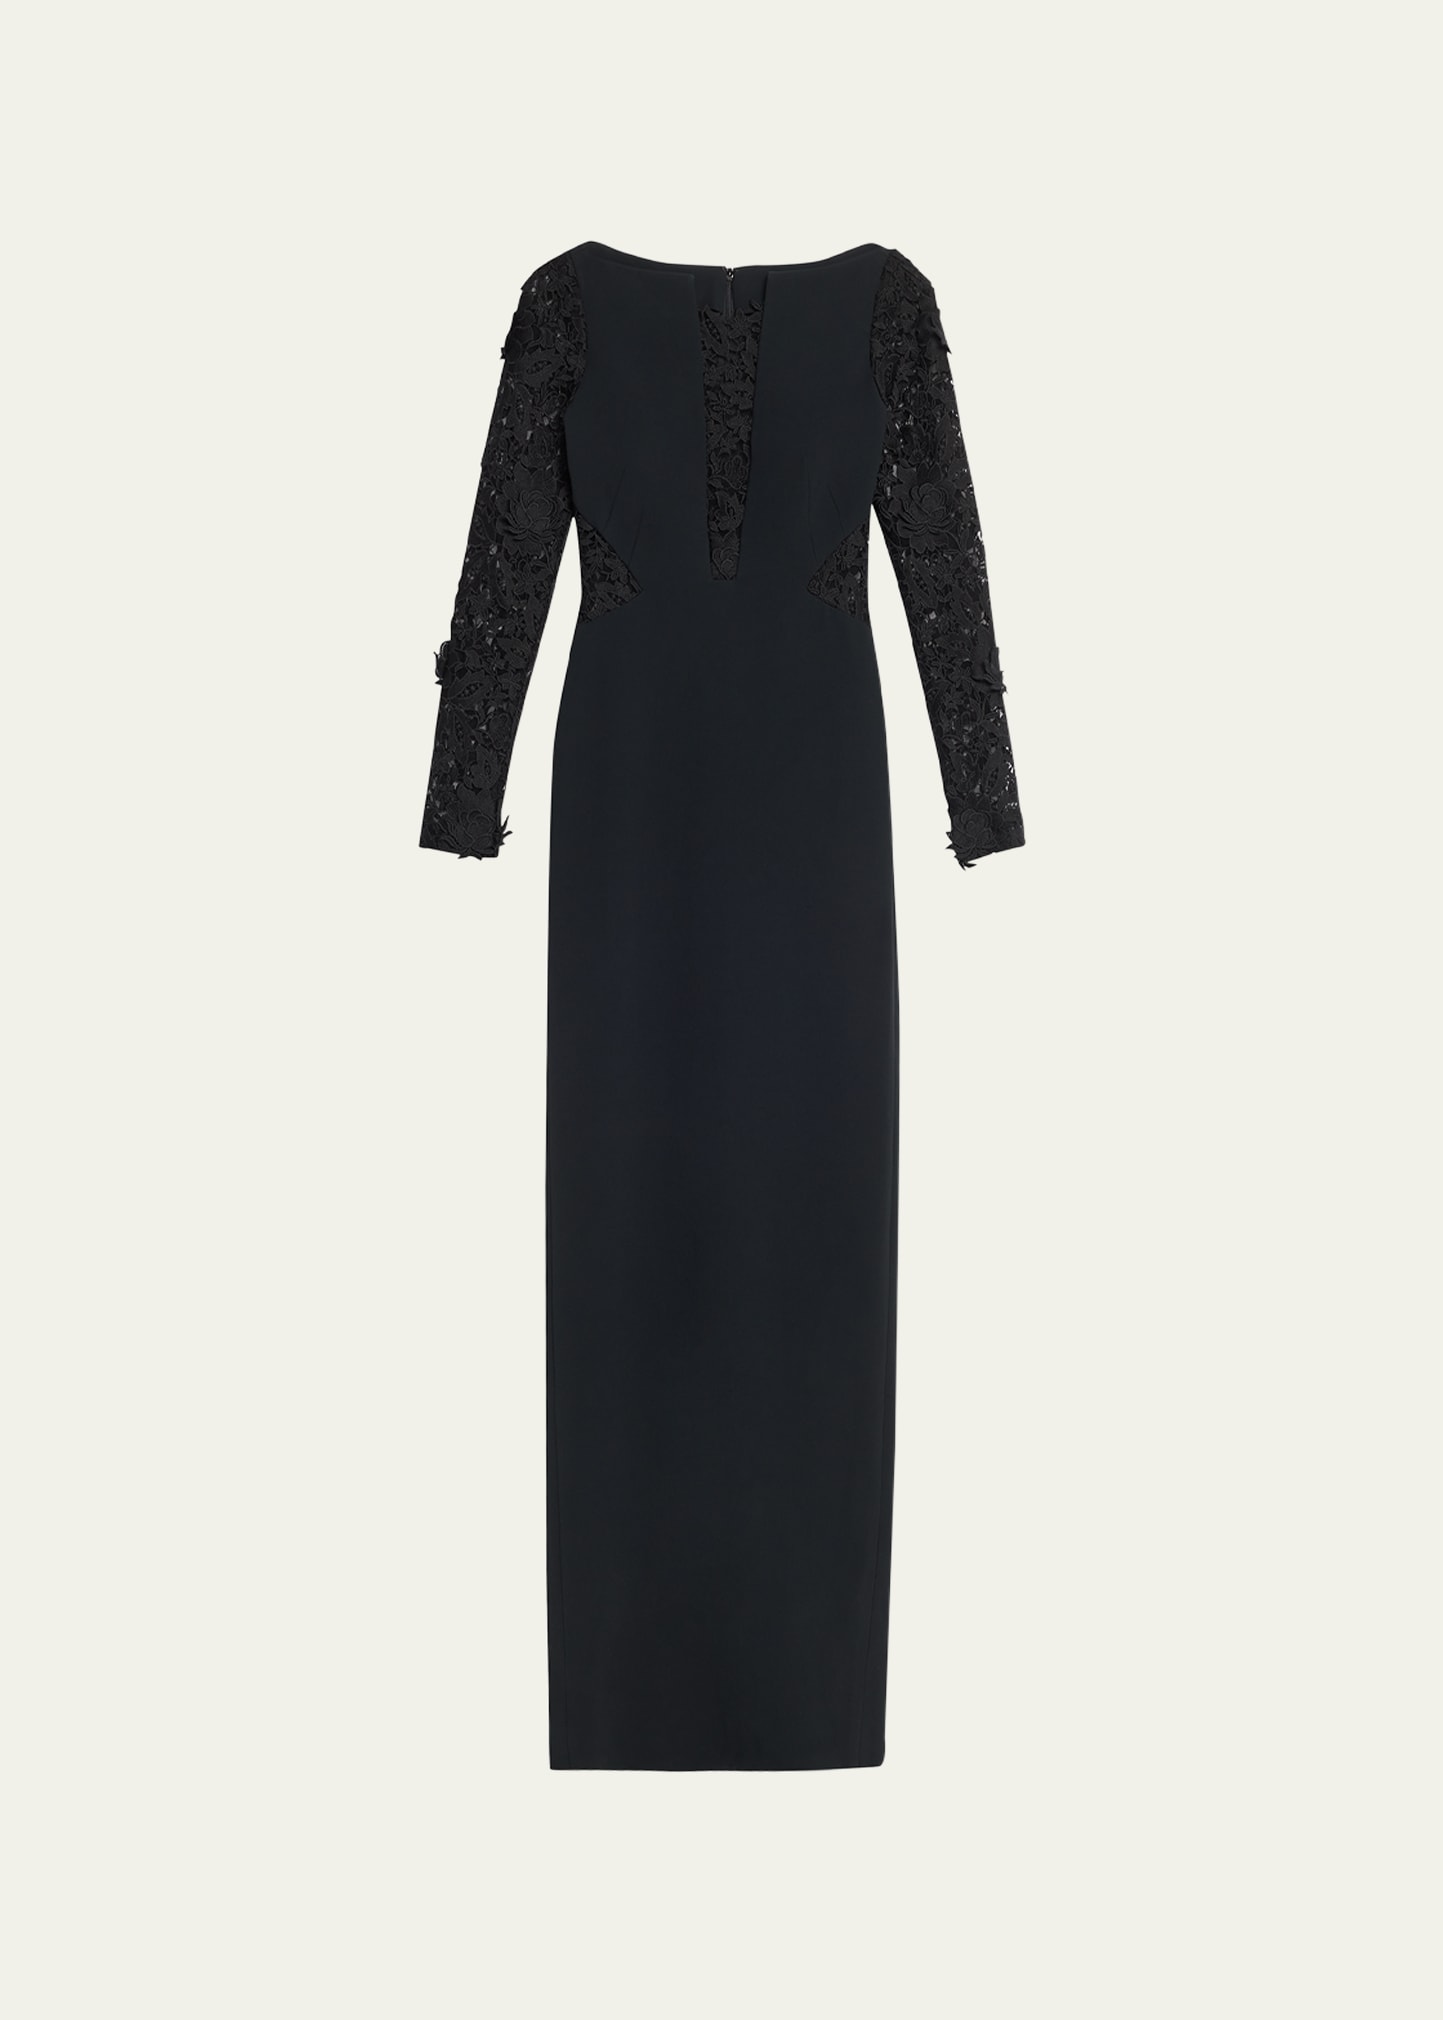 Pamella Roland Black Crepe Gown With Lace Panels And Sleeves